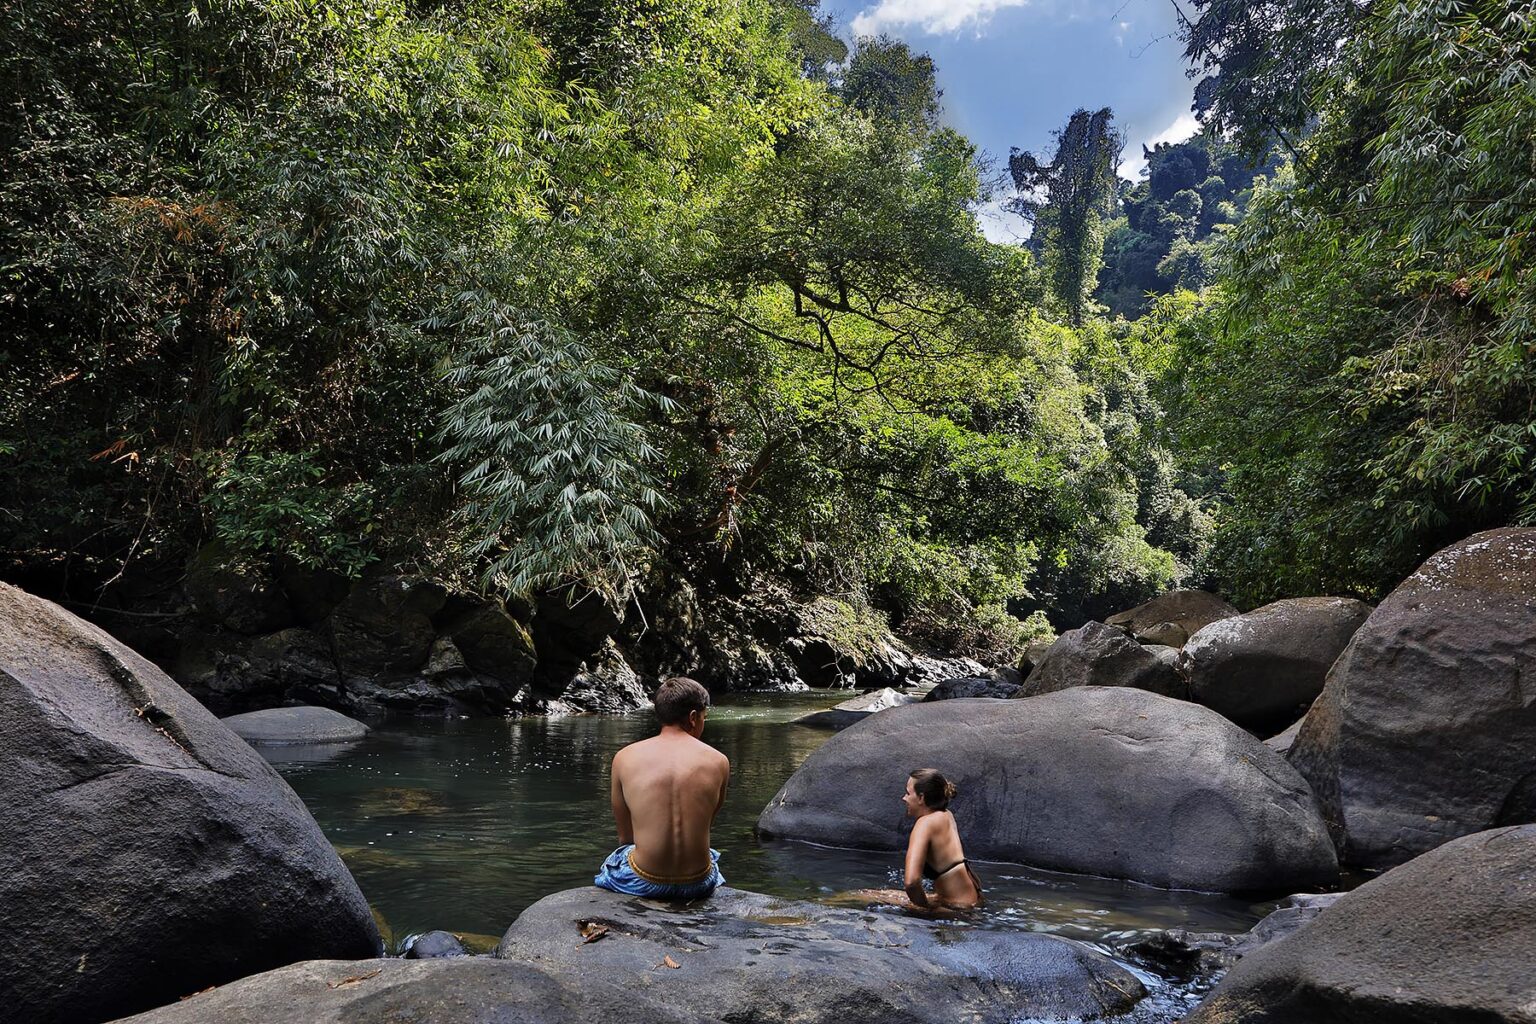 Swimming in the river in KHAO SOK NATIONAL PARK - KHAO SOK, THAILAND